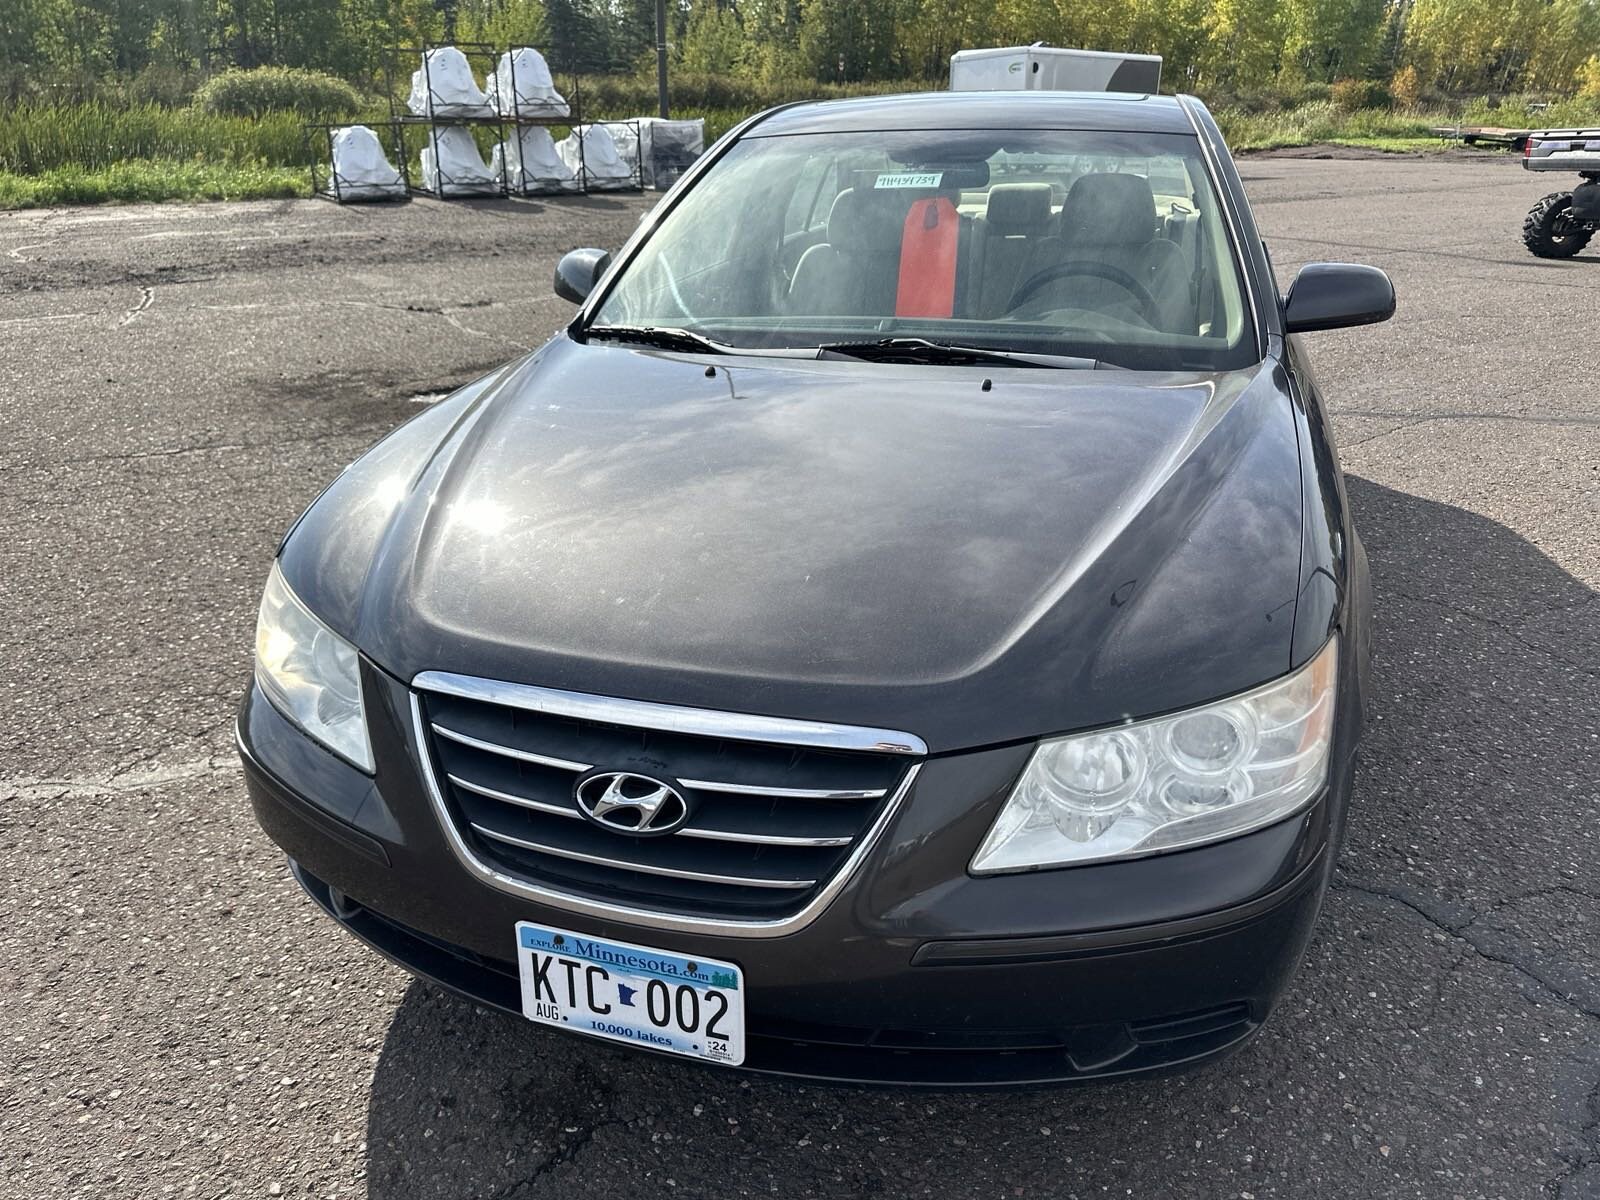 Used 2009 Hyundai Sonata GLS with VIN 5NPET46C19H434739 for sale in Two Harbors, Minnesota